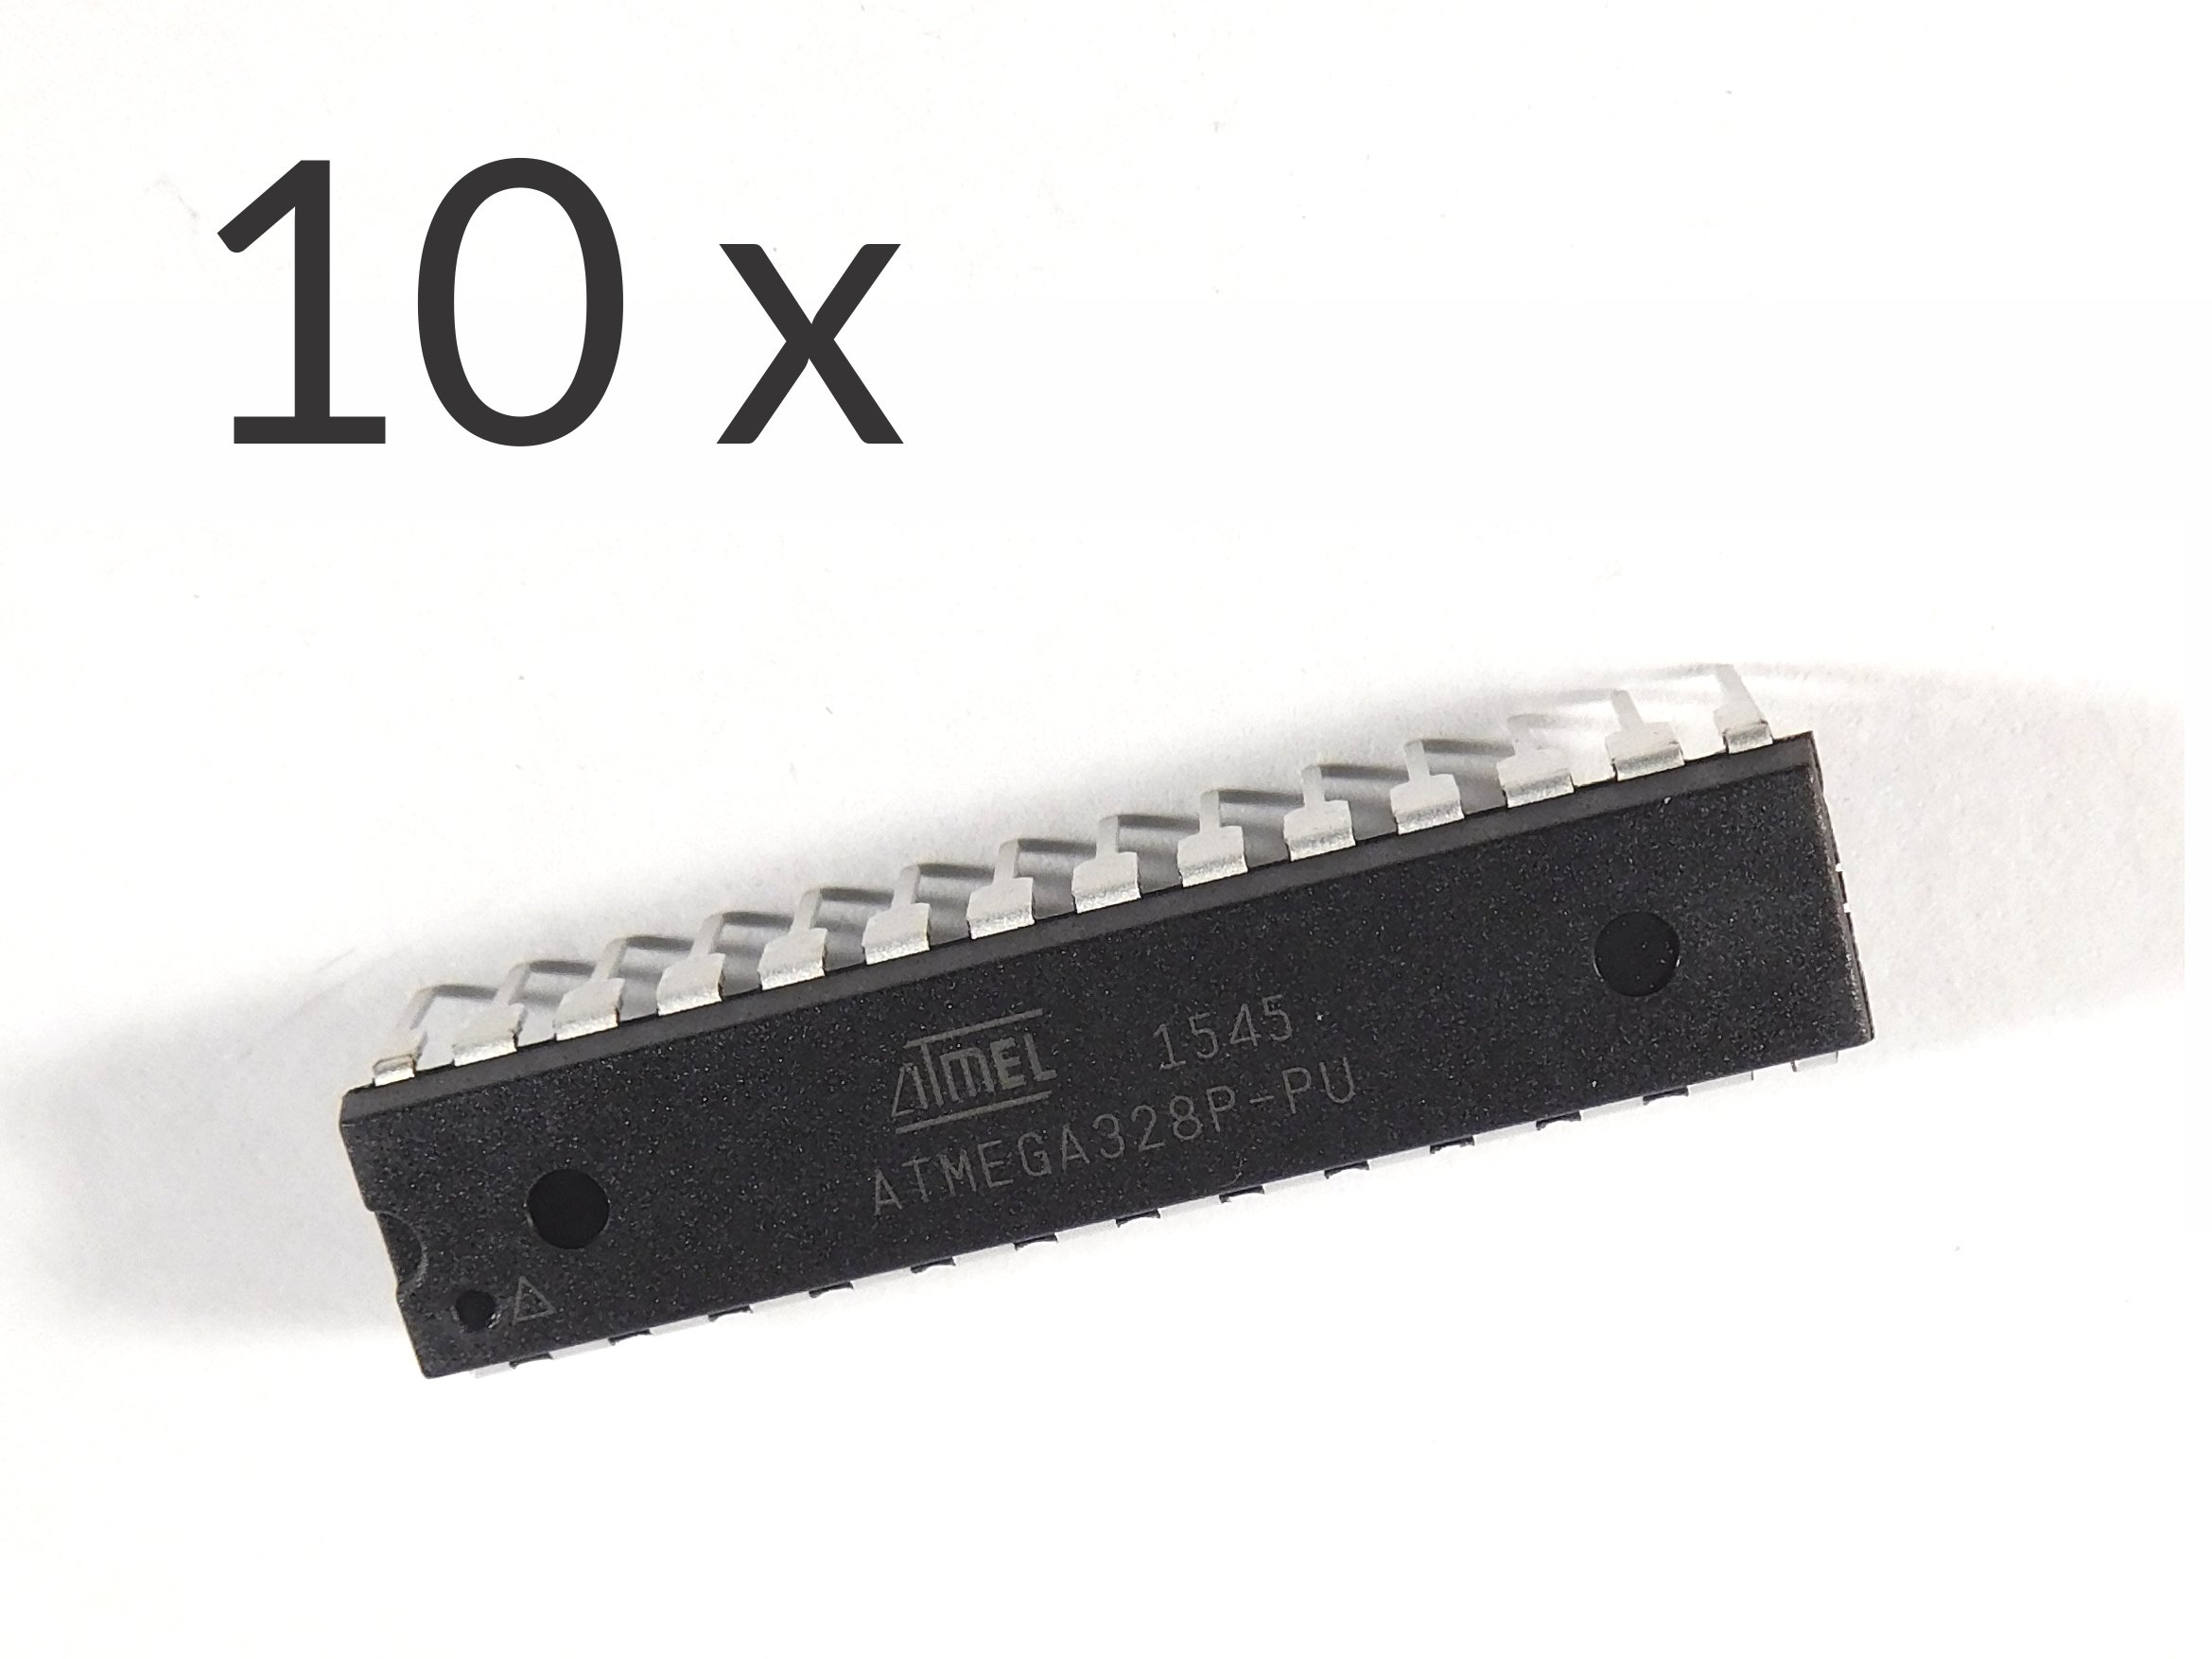 10 x Atmega328P-PU chips for Arduino UNO with bootloader (100% compatible with Arduino) 4